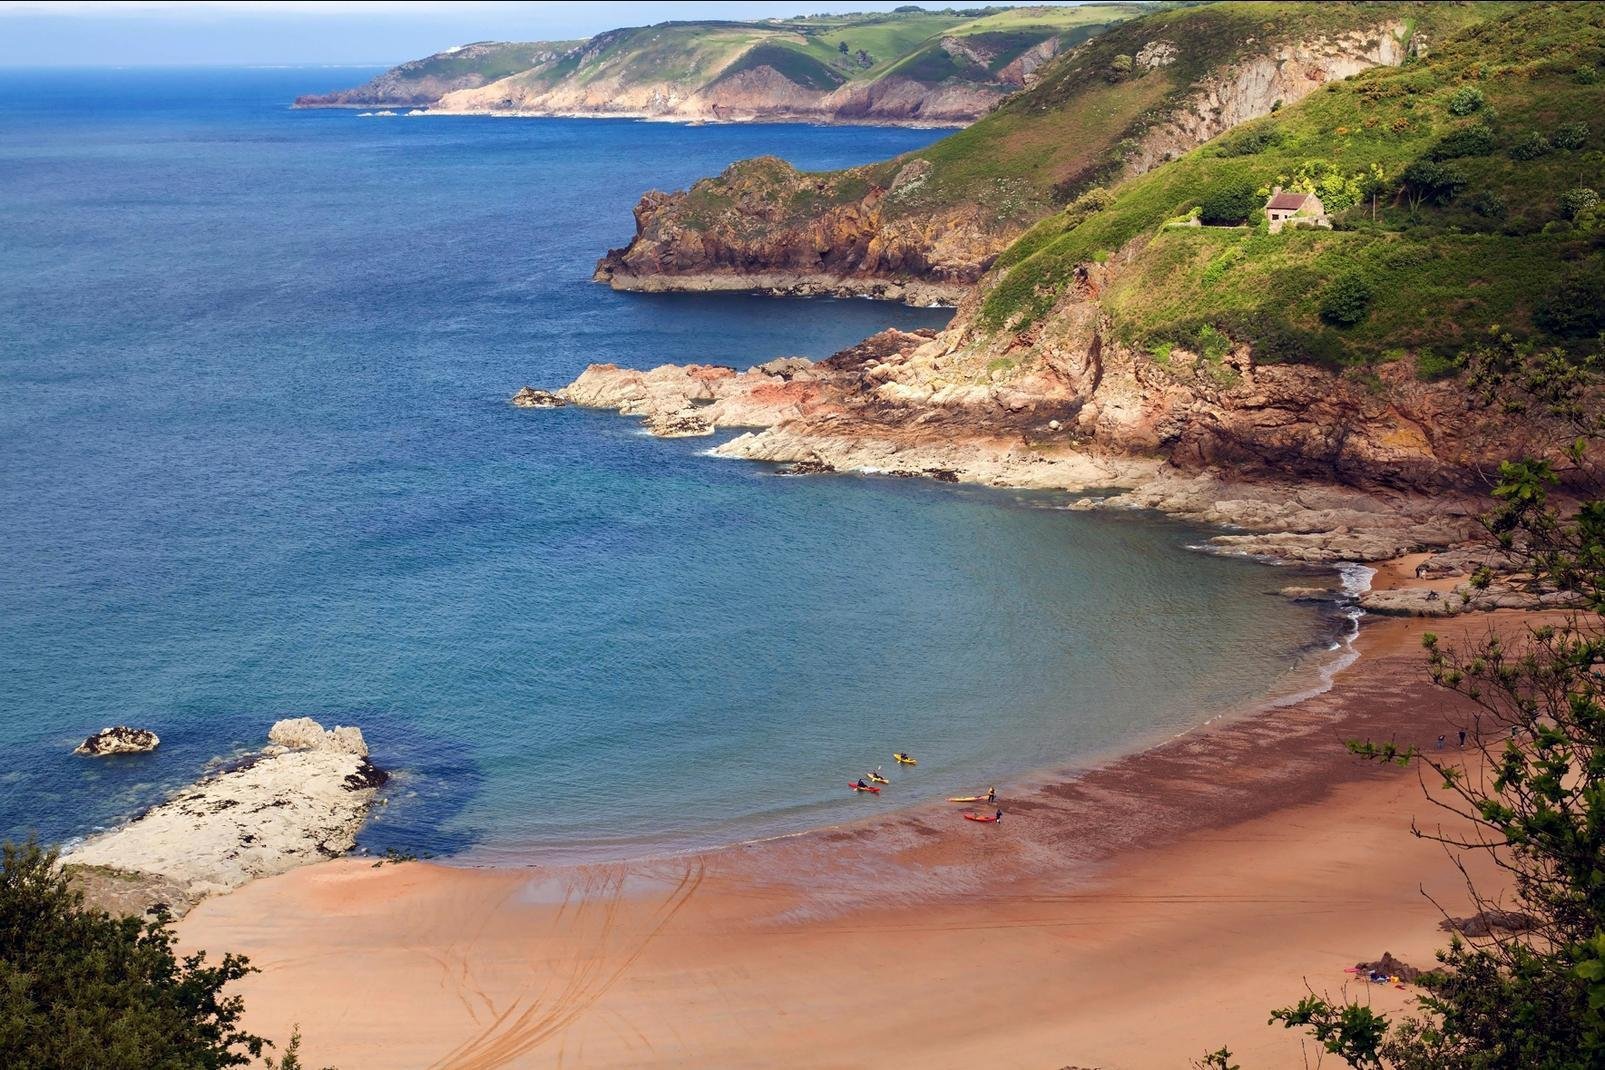 In figures, Jersey is impressive: this island nine miles long and a five miles wide manages to hold 130 hotels, 48 miles of coastline, 358 miles of roads, six golf courses, a city of 33 271 inhabitants (Saint-Hélier), 97 857 Jersey residents and a zoo.

Jersey's reputation as a haven for offshore investments is made clear in the city of Saint-Hélier where glitz and glamour are the key words. However, ...